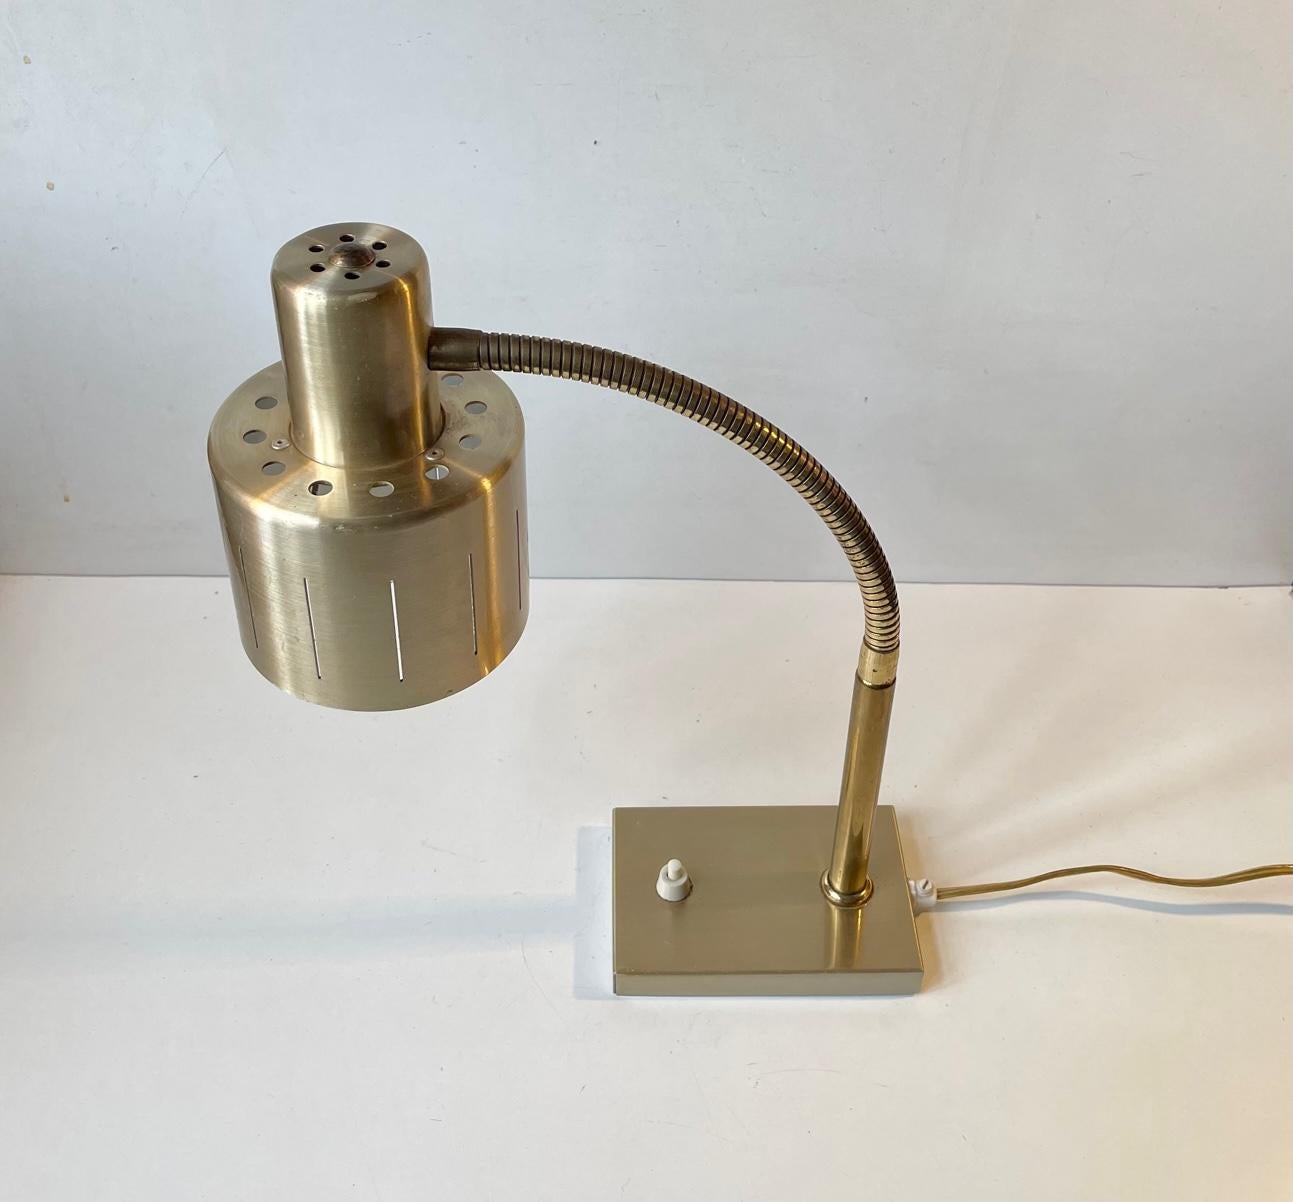 plug in wall sconce